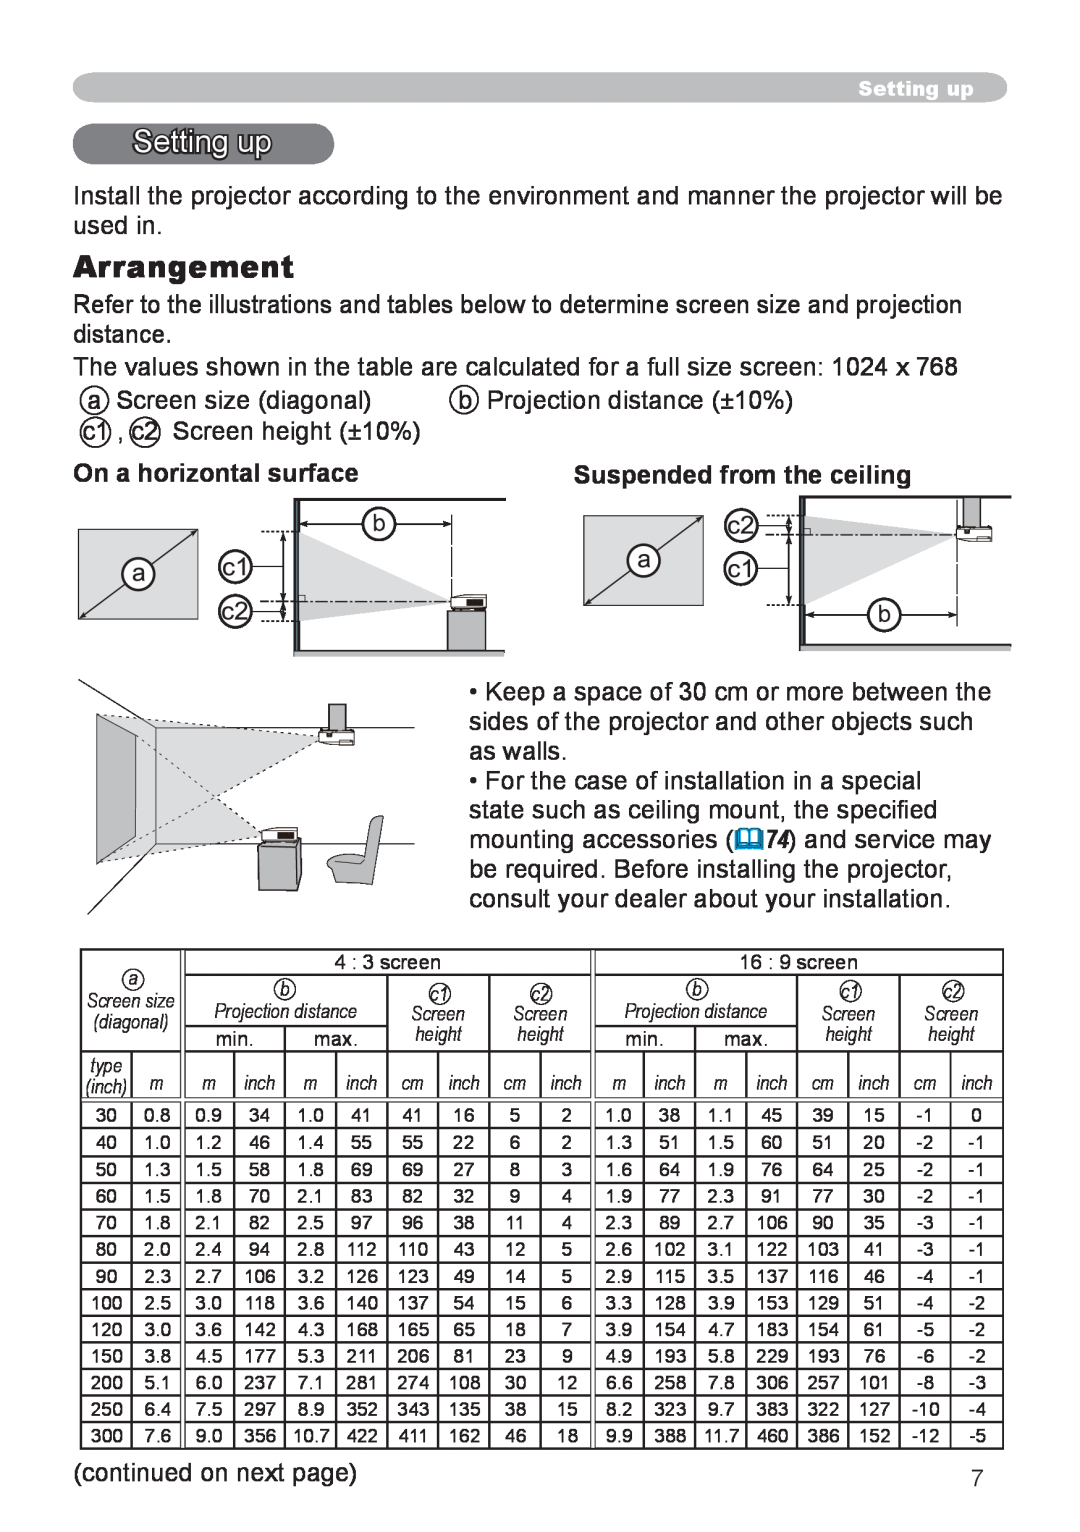 Dukane 8919H-RJ, 8920H-RJ, 8755J-RJ user manual Setting up, Arrangement, On a horizontal surface, Suspended from the ceiling 